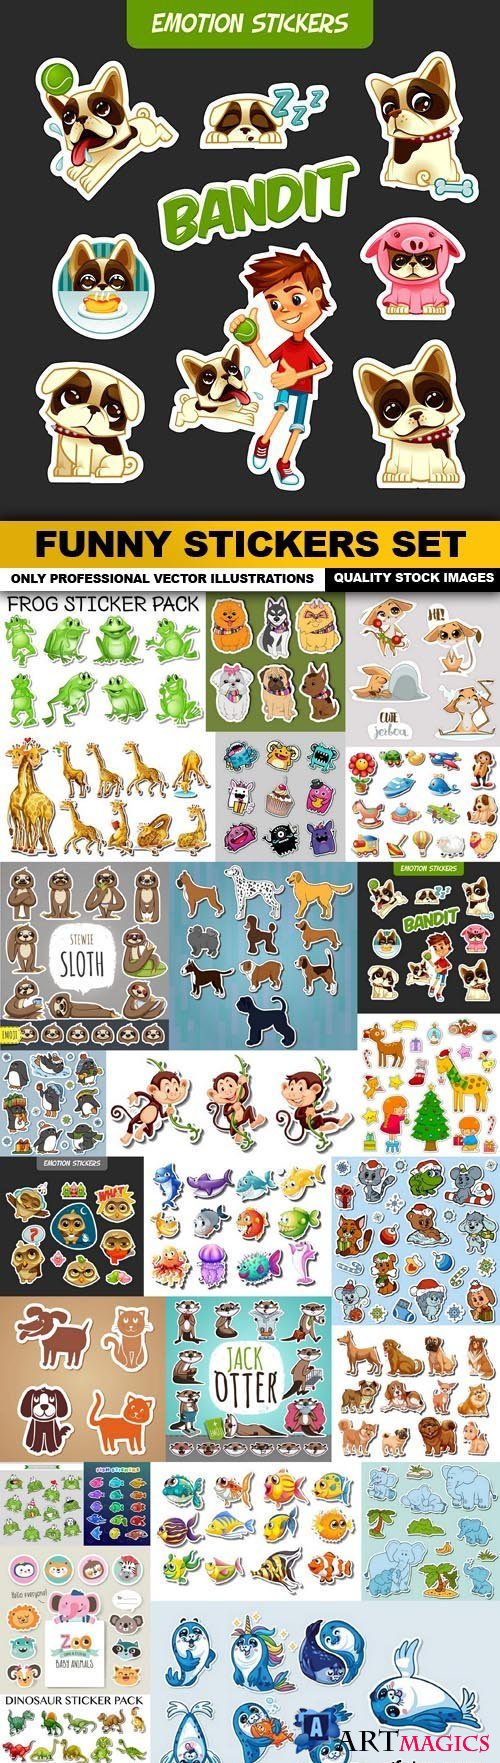 Funny Stickers Set - 25 Vector